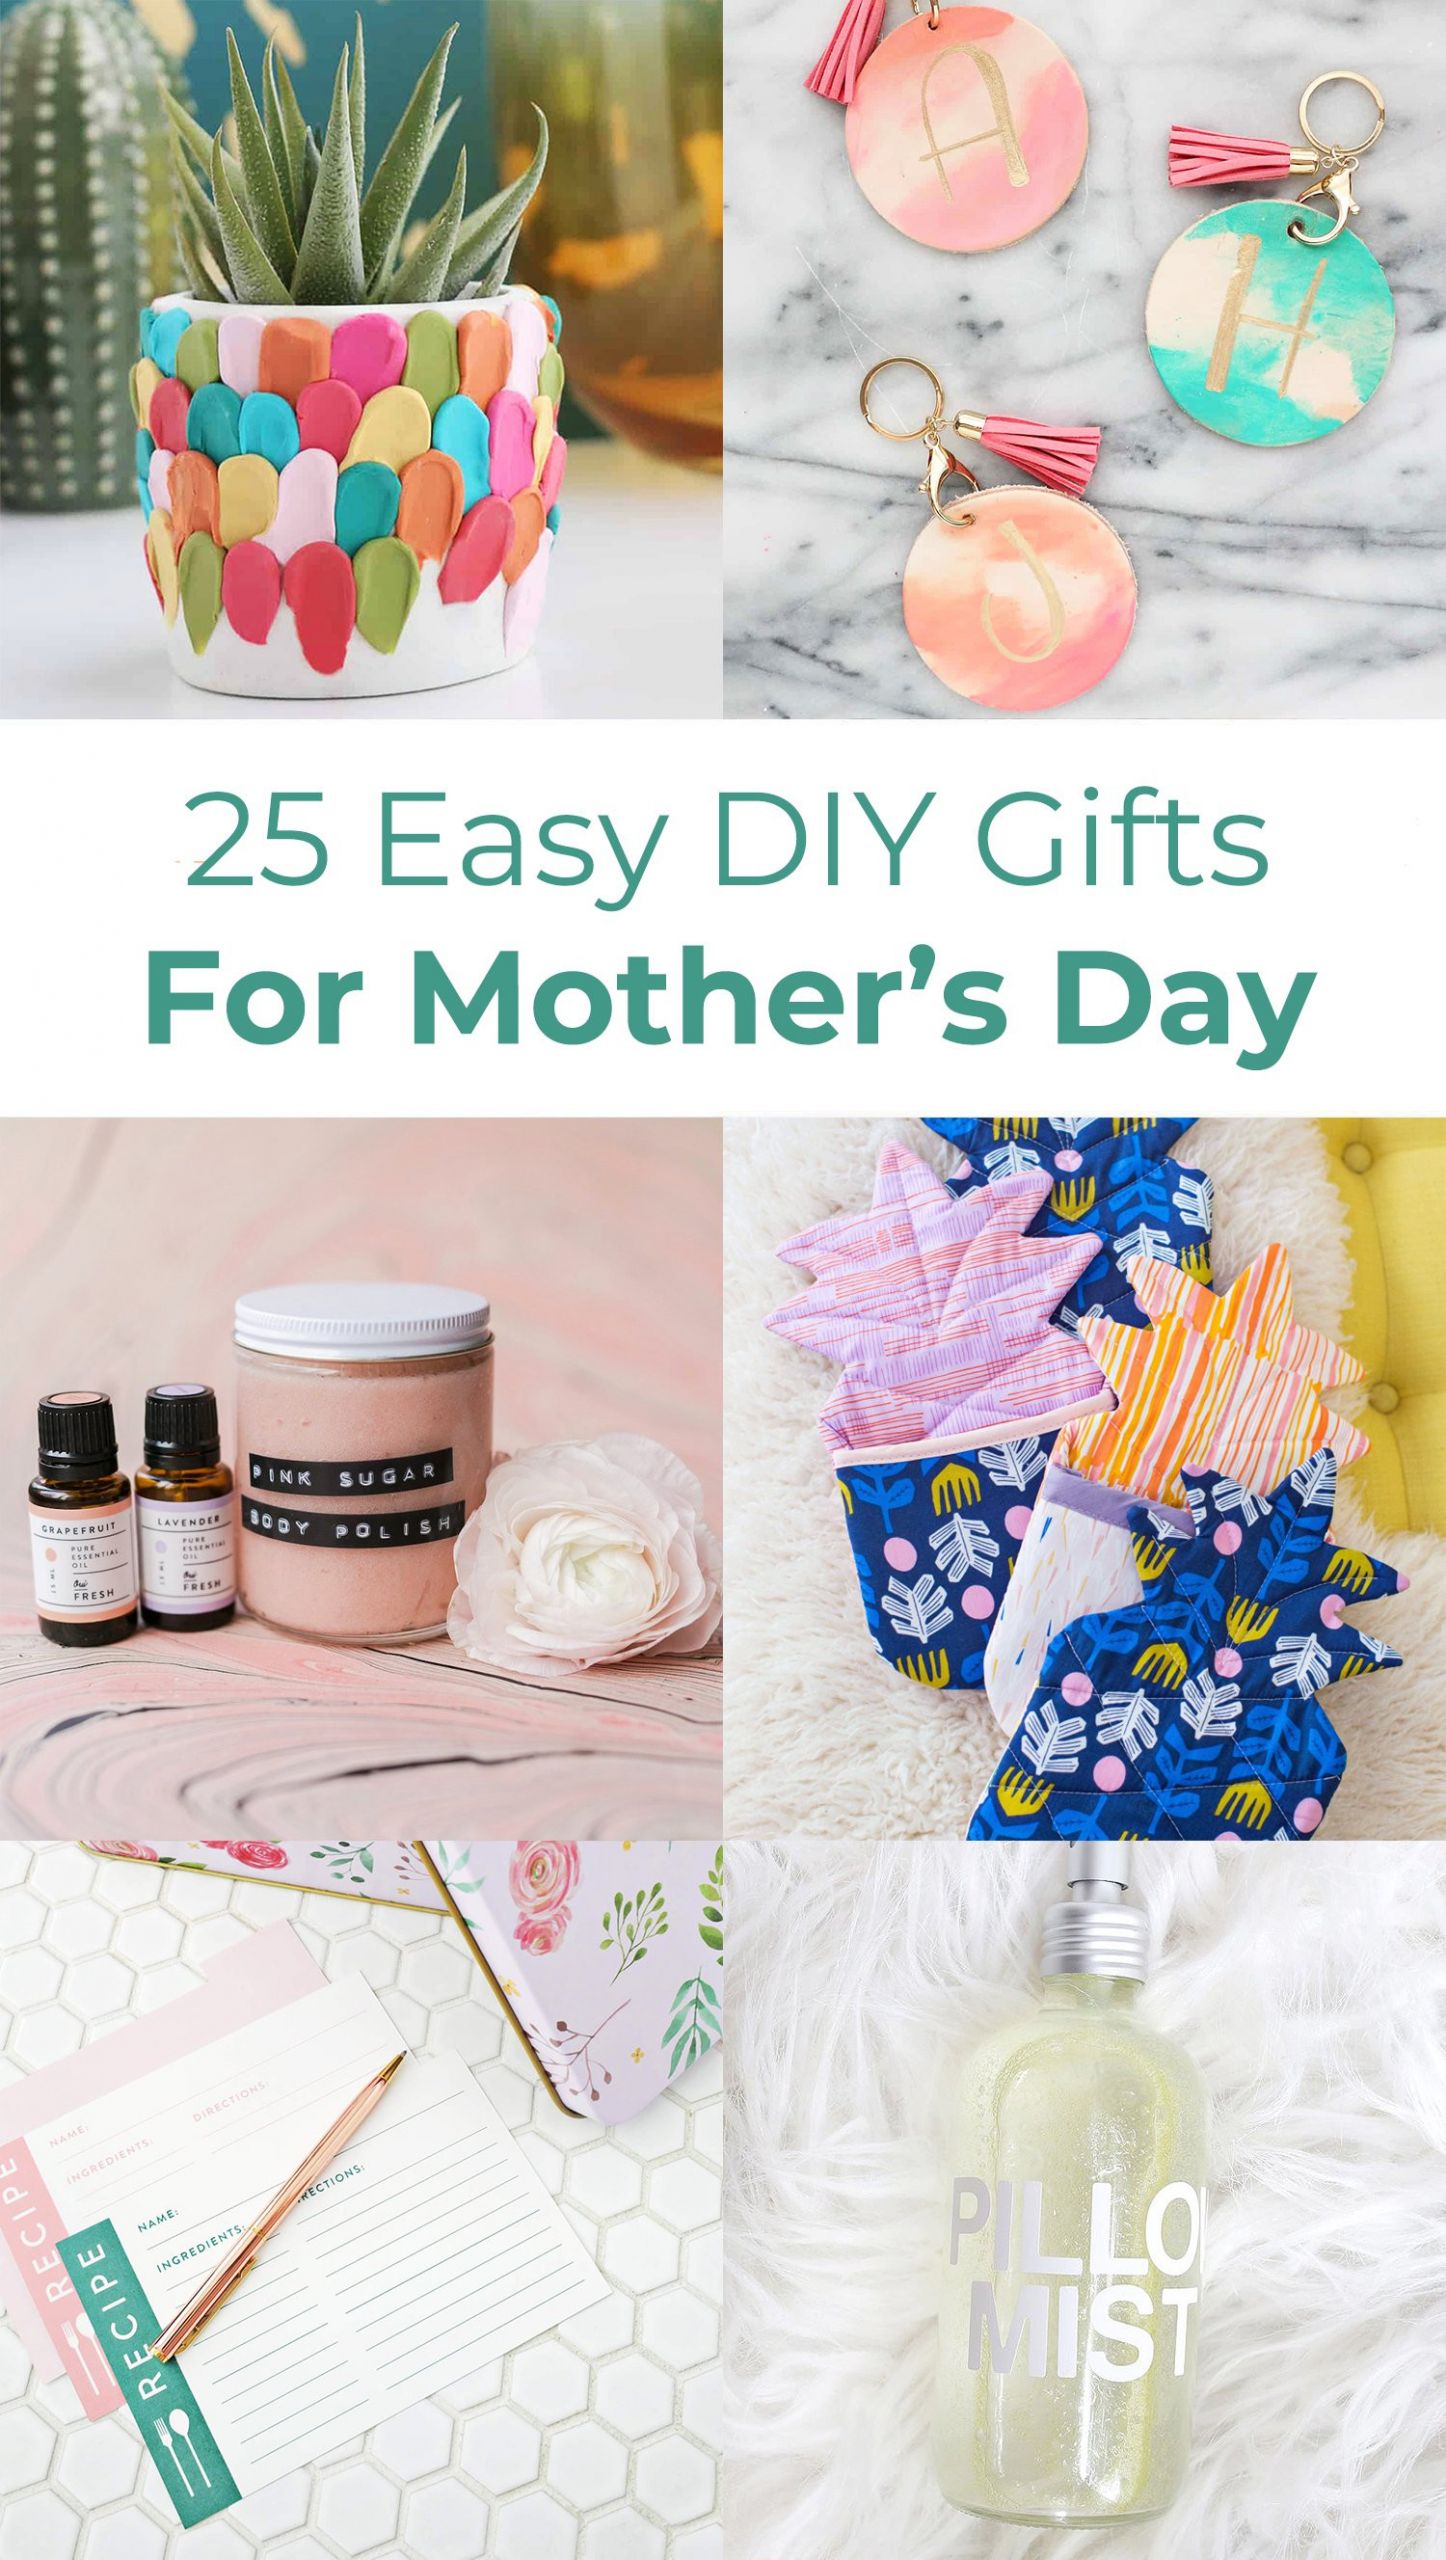 Easy Diy Mother's Day Gifts
 25 Easy DIY Gift Ideas For Mother s Day A Beautiful Mess